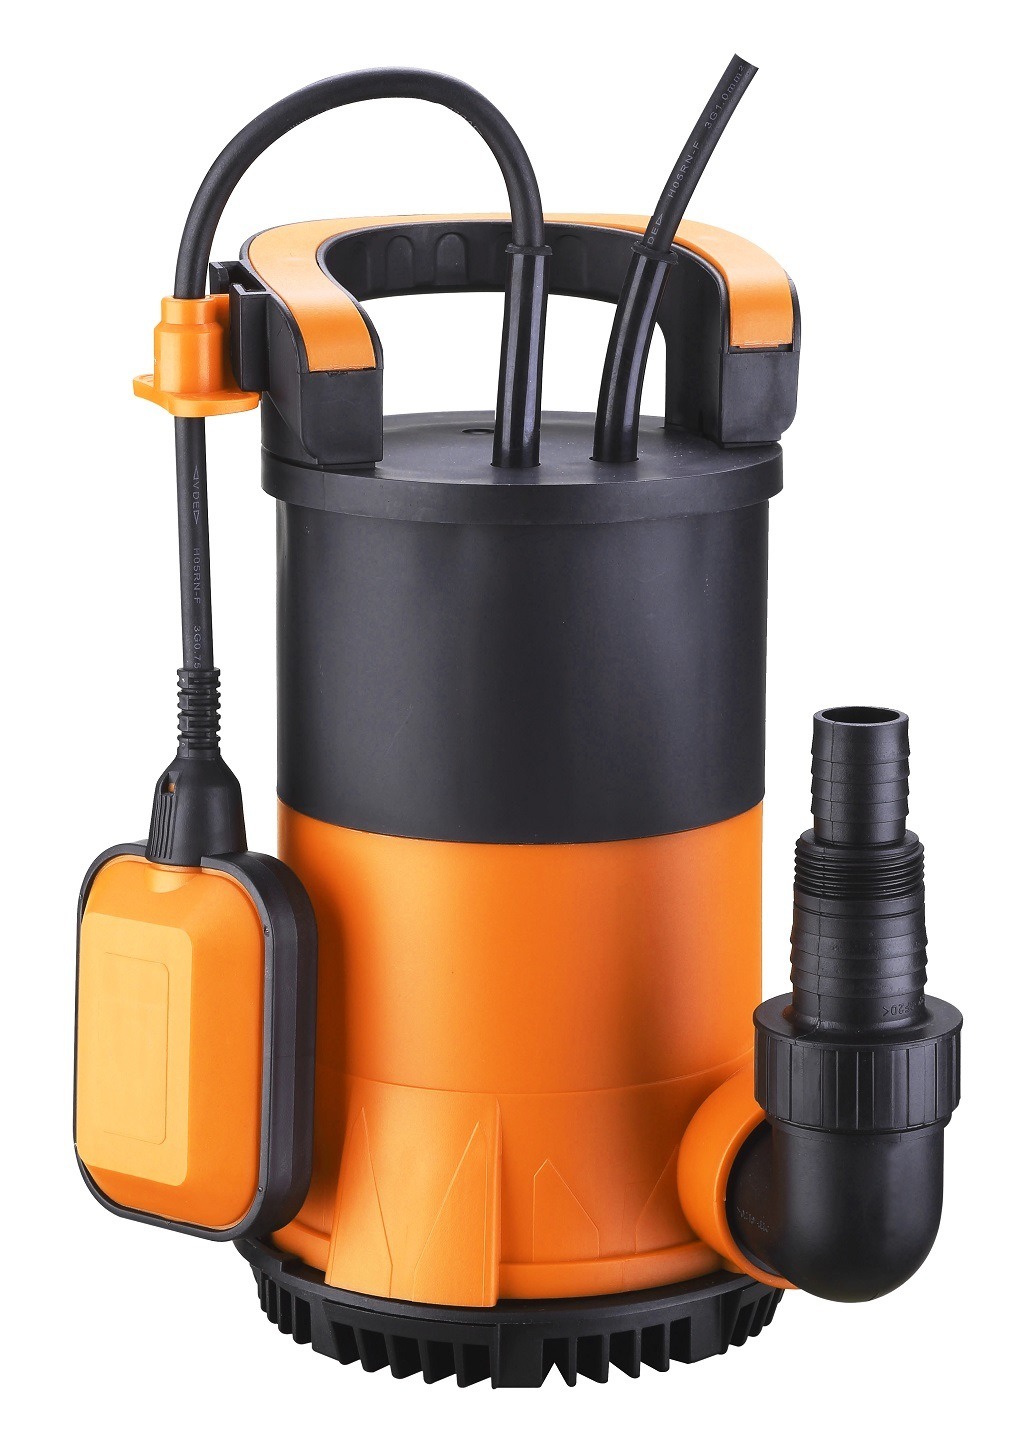 Pump Base Exchange for Clean/Dirty/1mm Low Suction Electric Water Pump/Submersible Water Pump